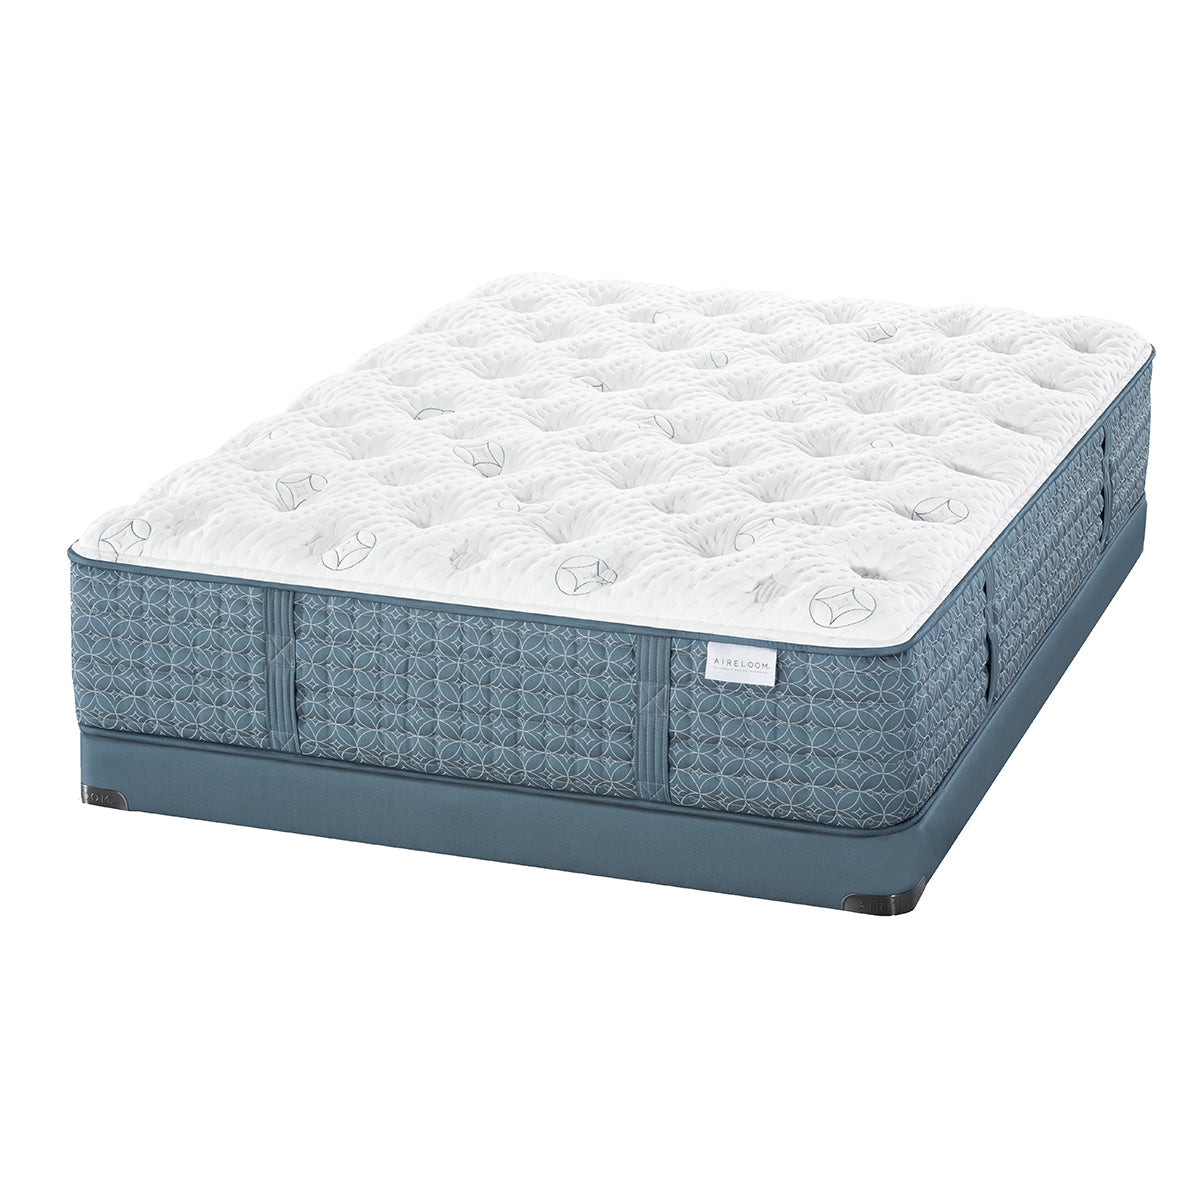 Aireloom Etude Extra Firm Mattress On A Low Profile 5" Box Spring